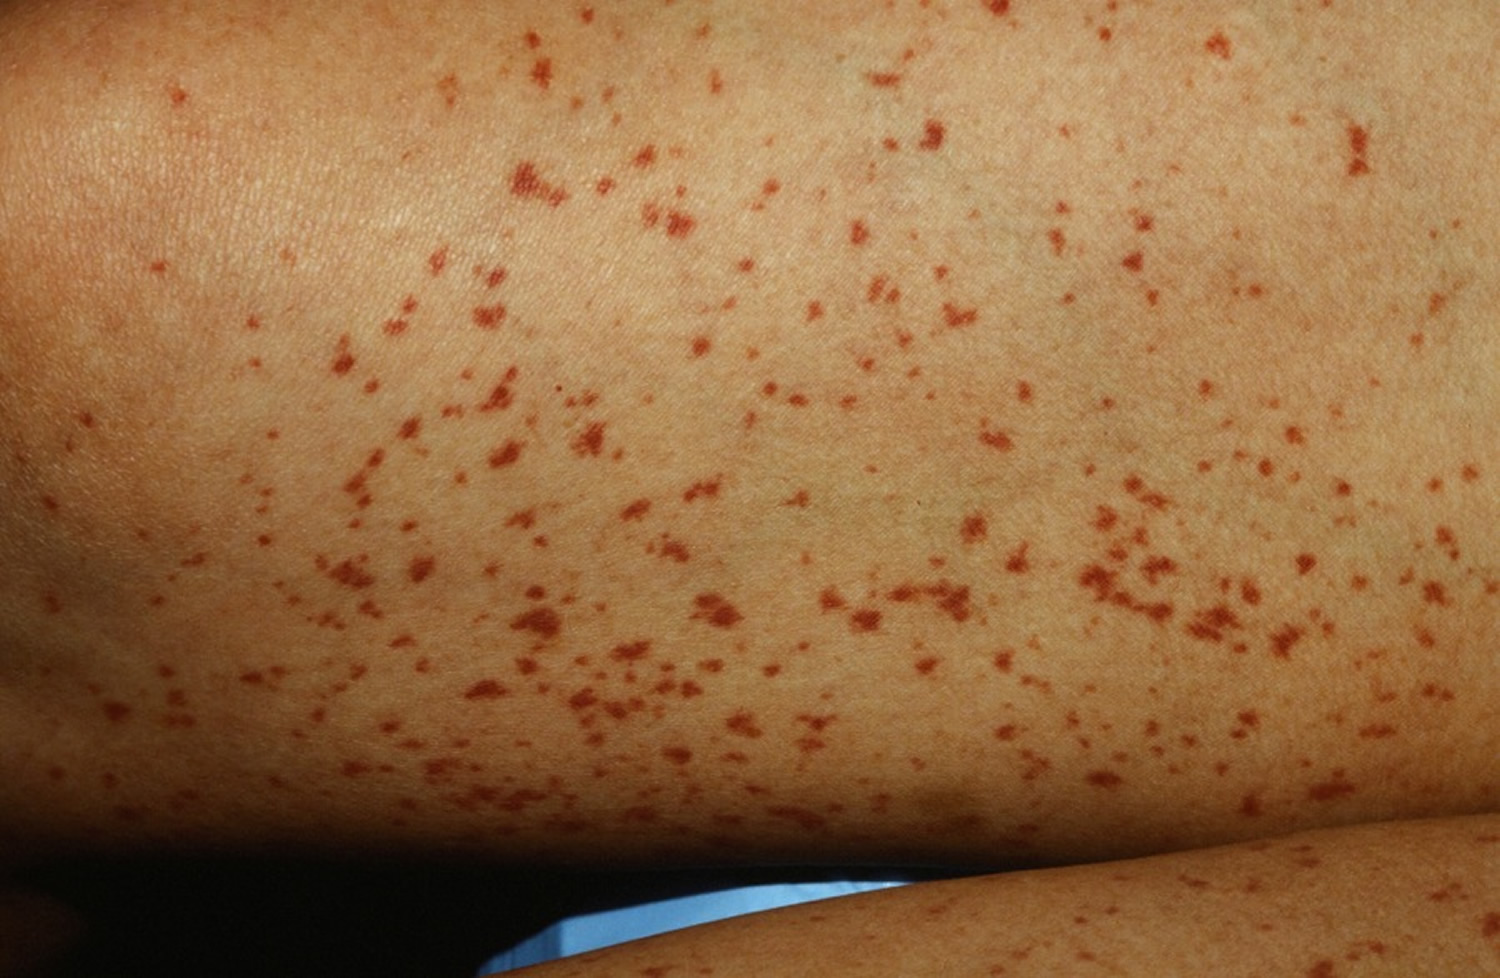 what are red pinpoint spots on skin